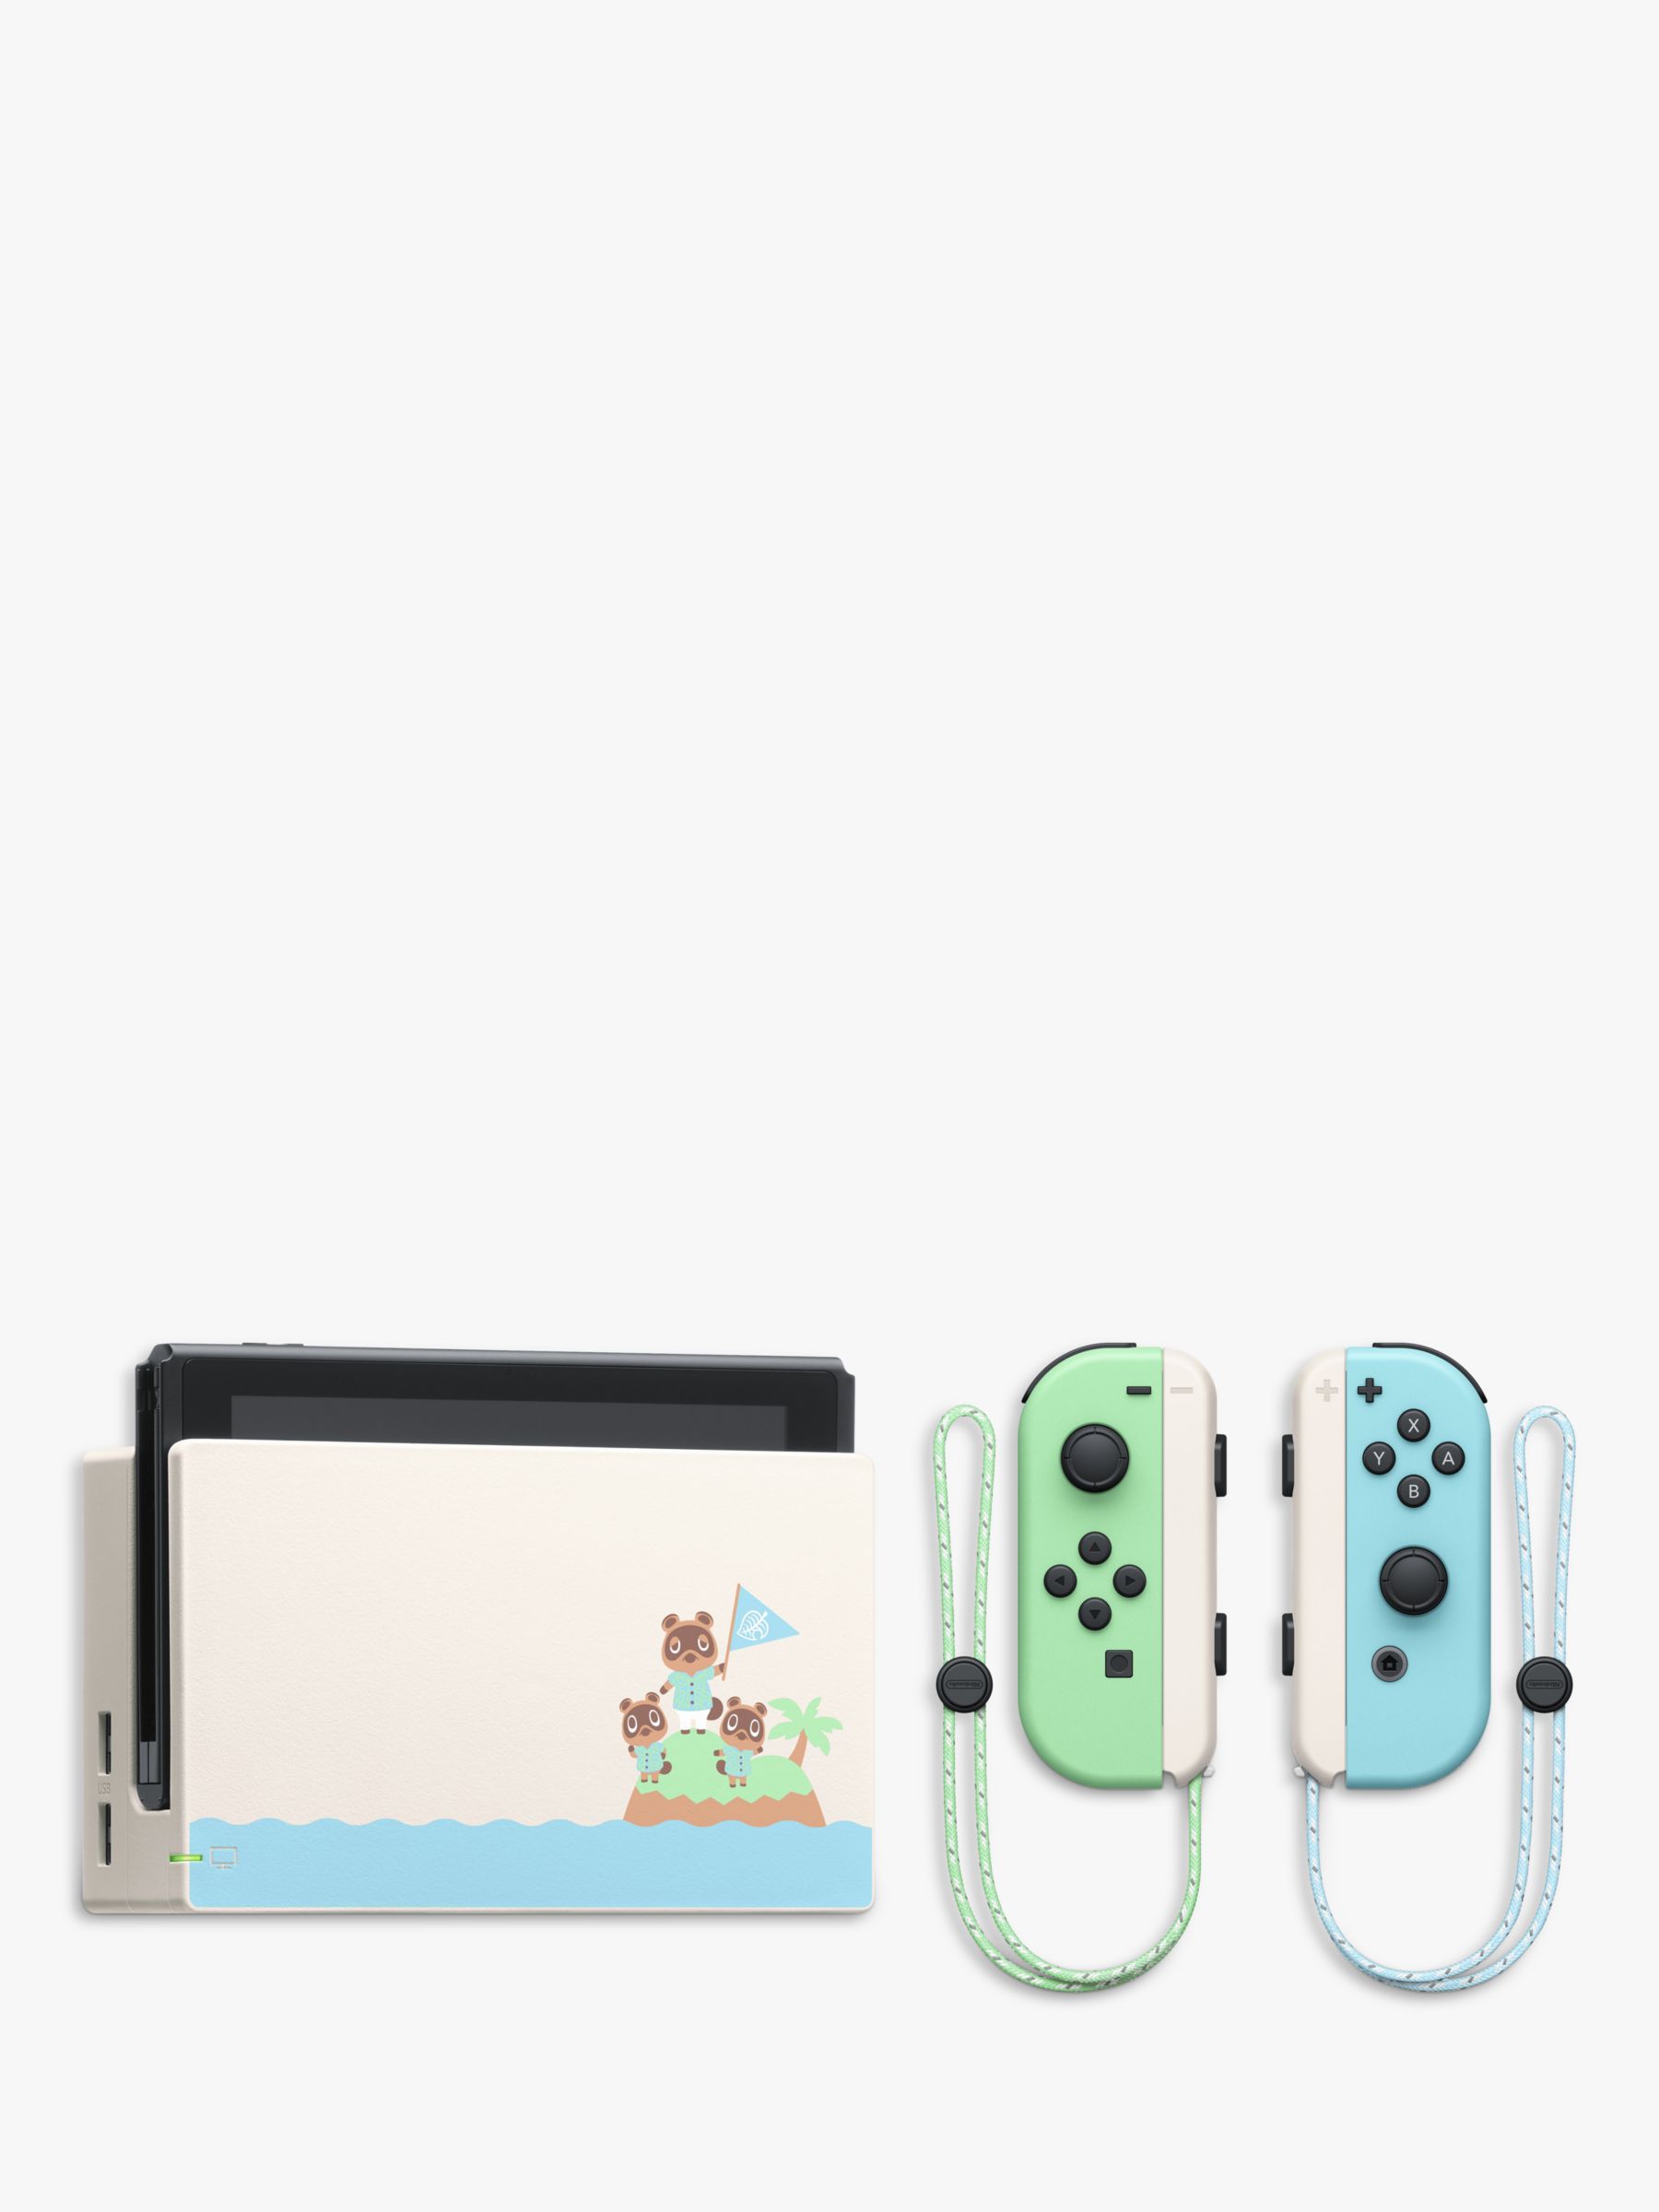 wii switch animal crossing edition